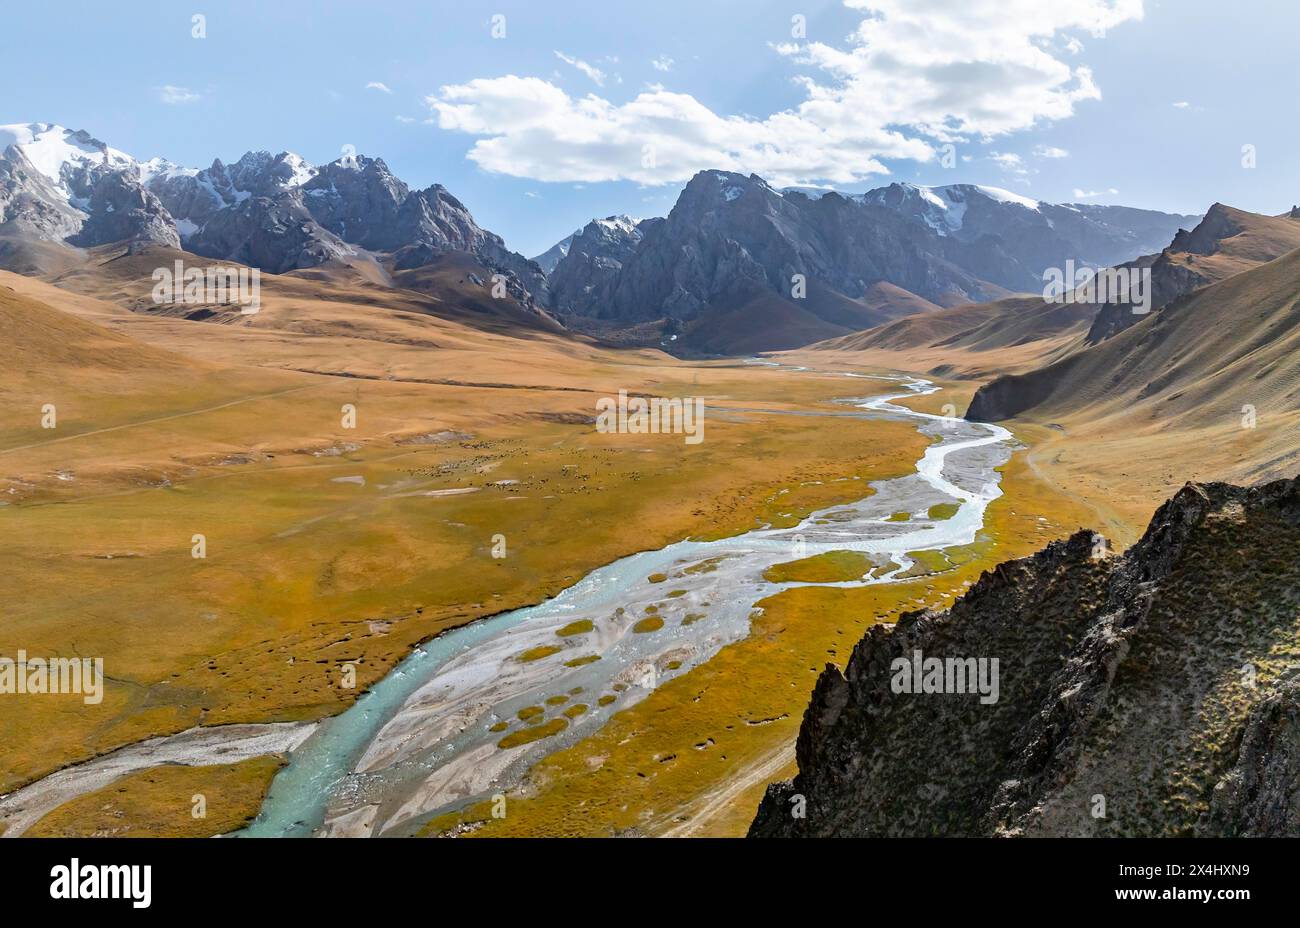 Aerial view, River Kol Suu winds through a mountain valley with hills covered with yellow grass, Pointed high mountain peaks with glaciers, Keltan Stock Photo